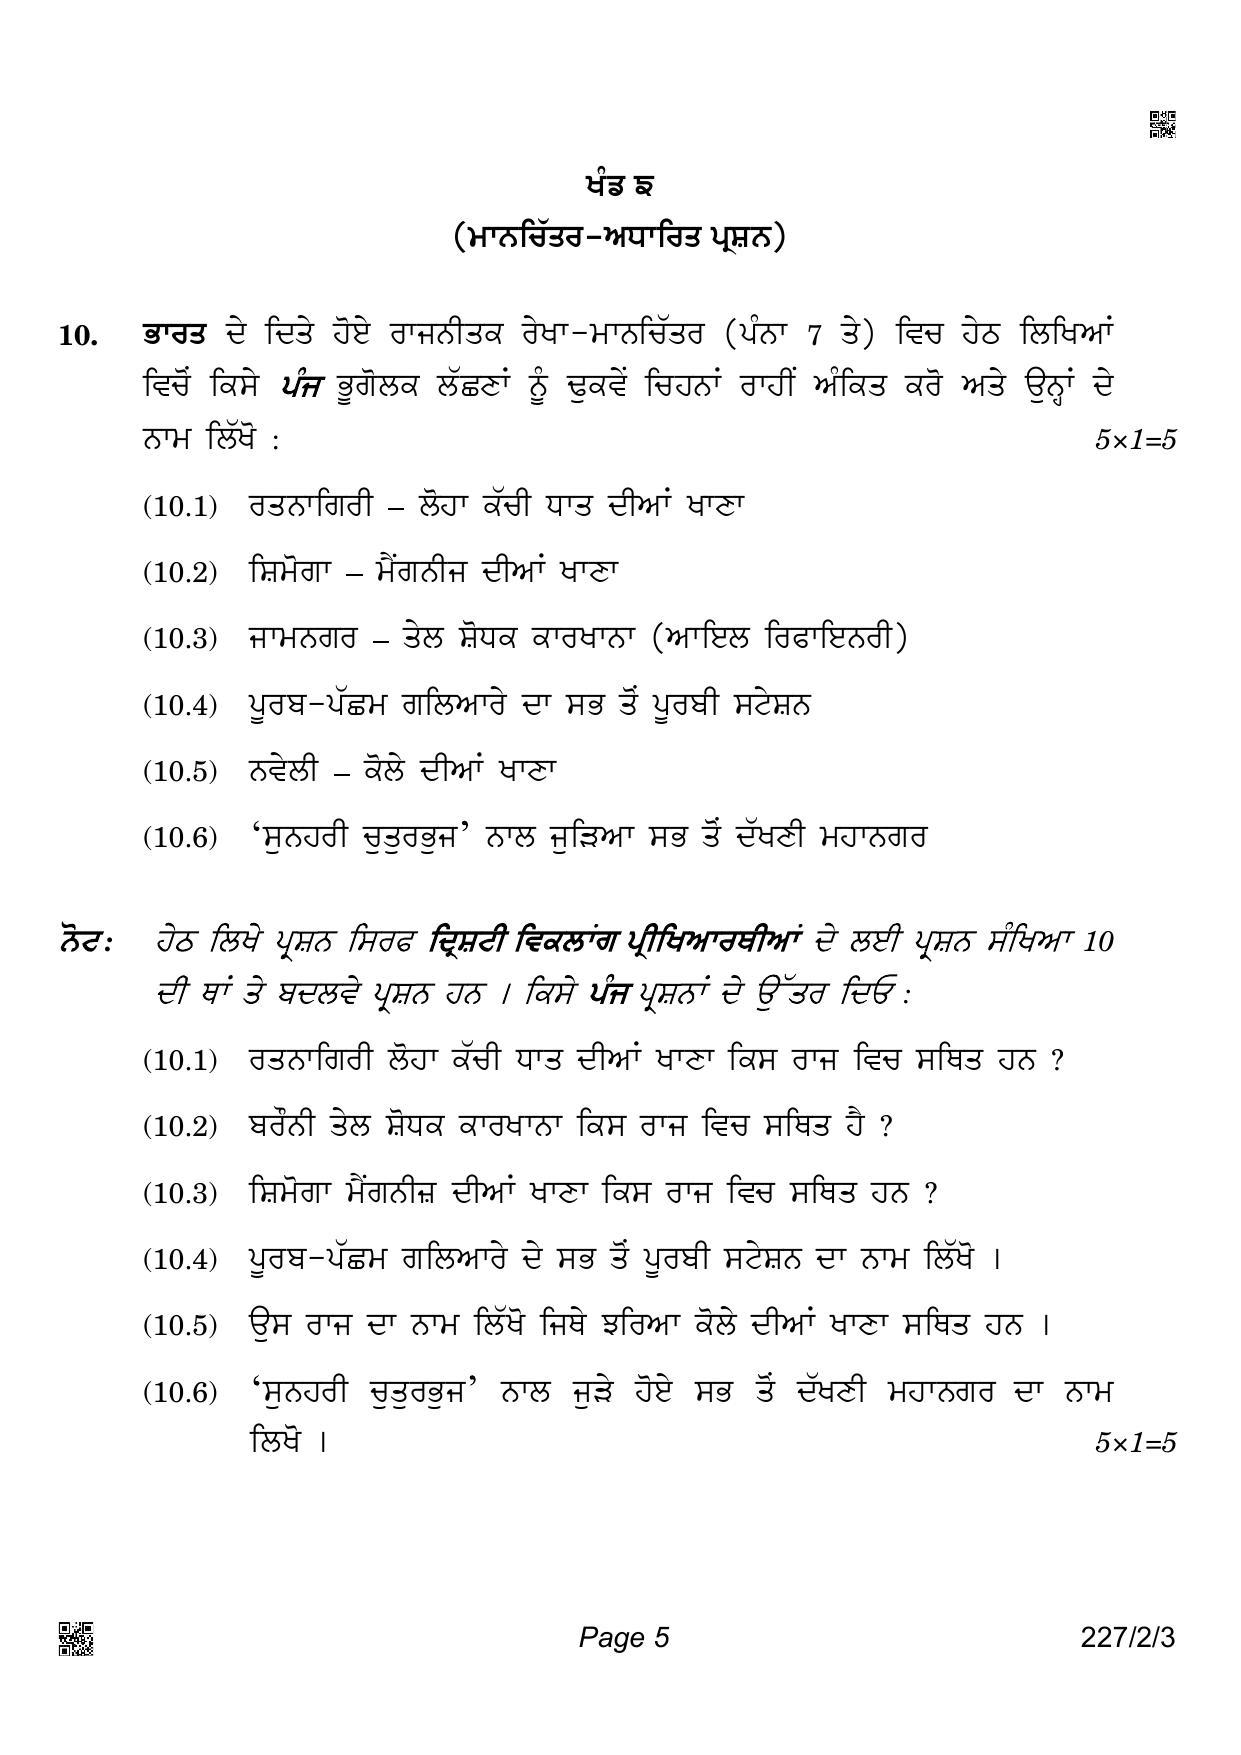 CBSE Class 12 227-2-3 Geography  Punjabi Version 2022 Question Paper - Page 5